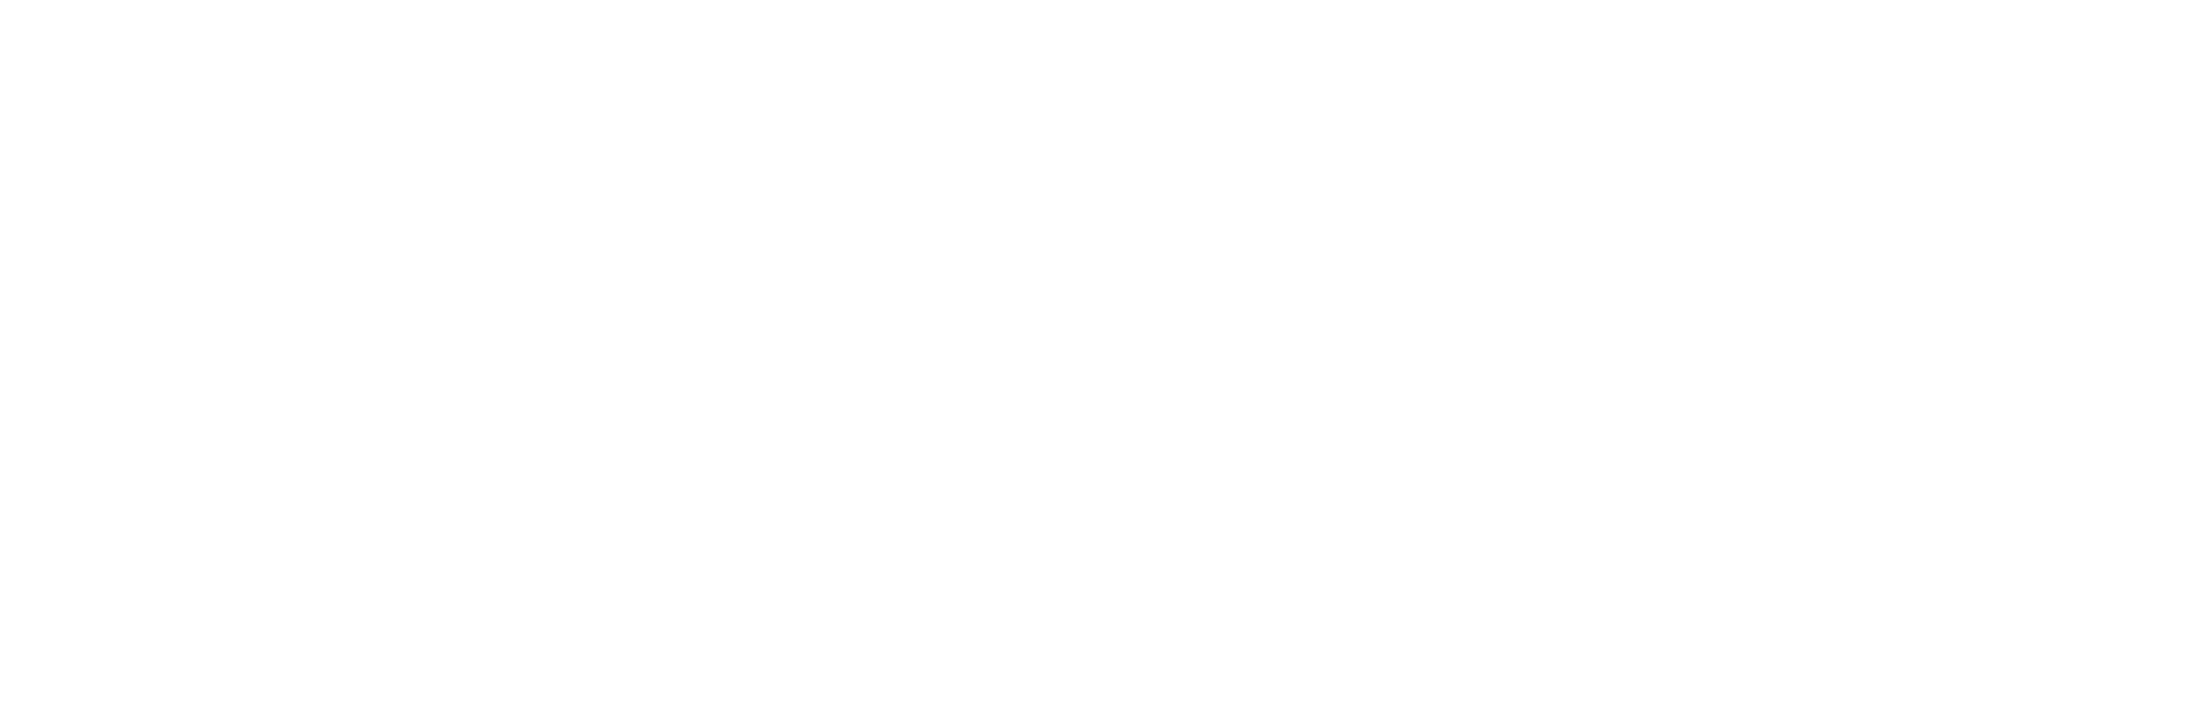 Good Measure Brewing Co. - Vermont Brewers Association